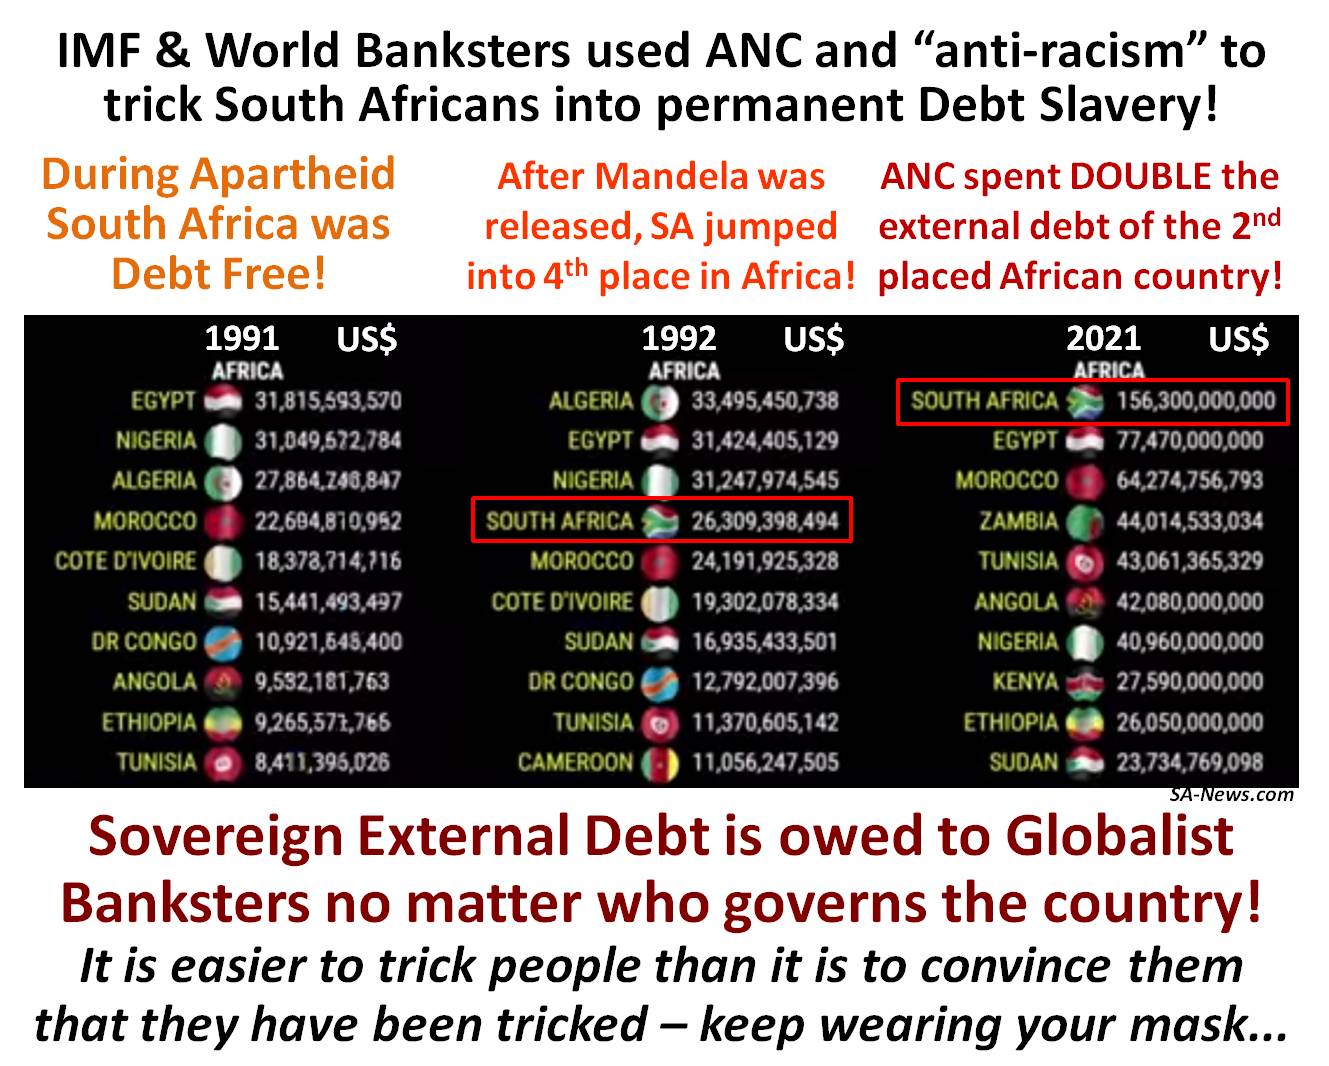 IMF & World Banksters used ANC & “anti-racism” to Trick South Africa into Permanent Debt Slavery!